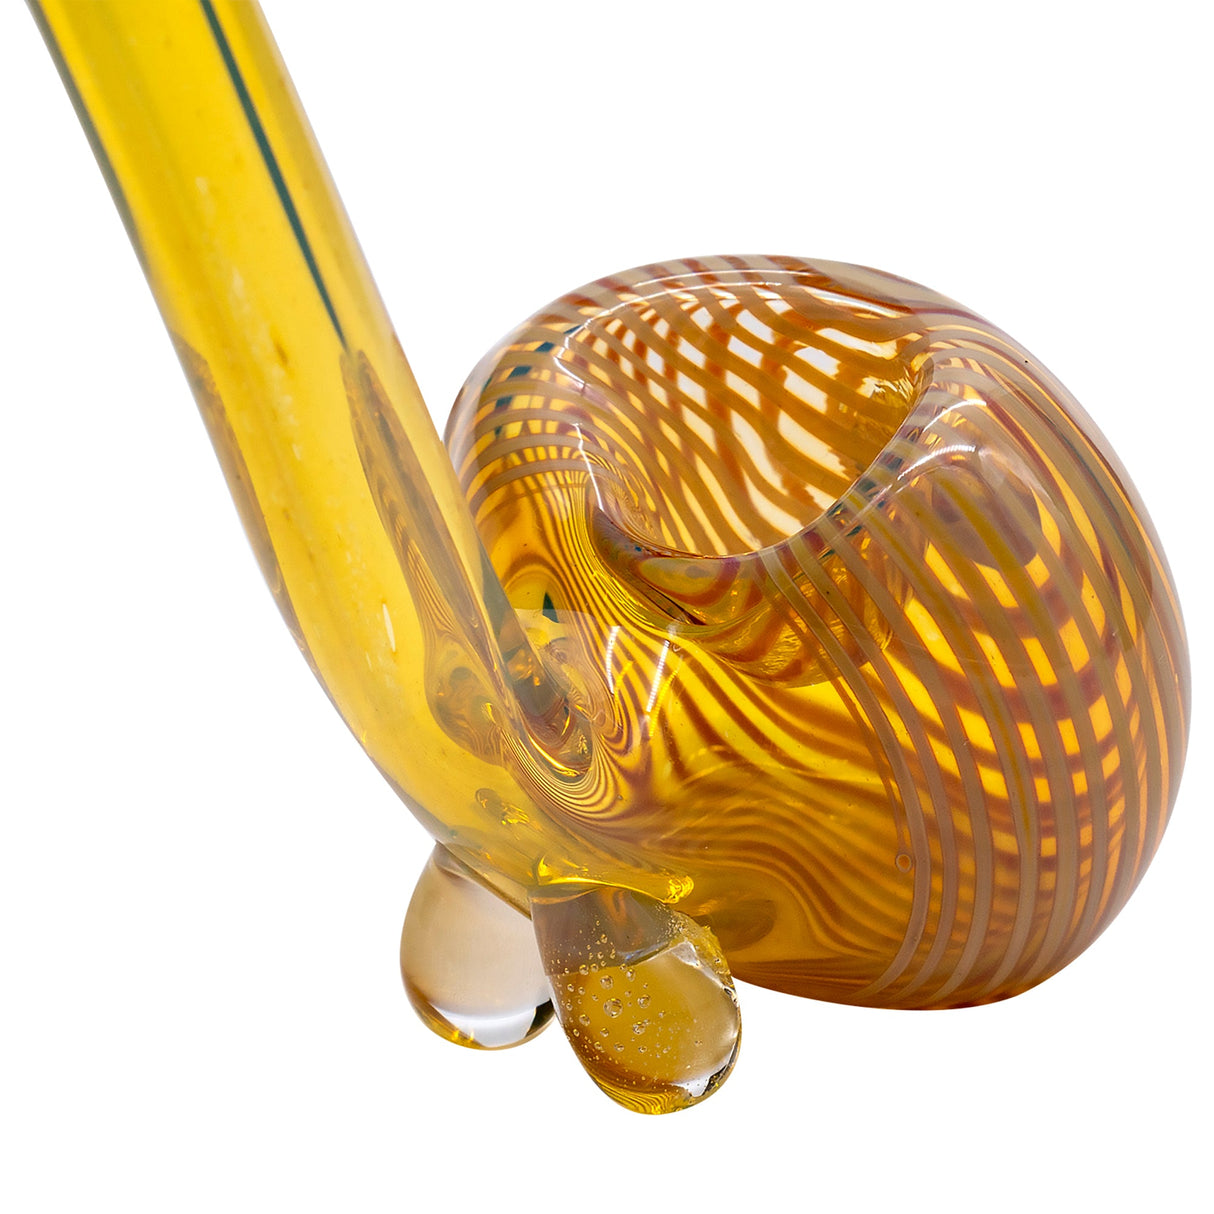 LA Pipes "Flaco" Skinny Glass Sherlock Pipe in Amber - Close-up Side View